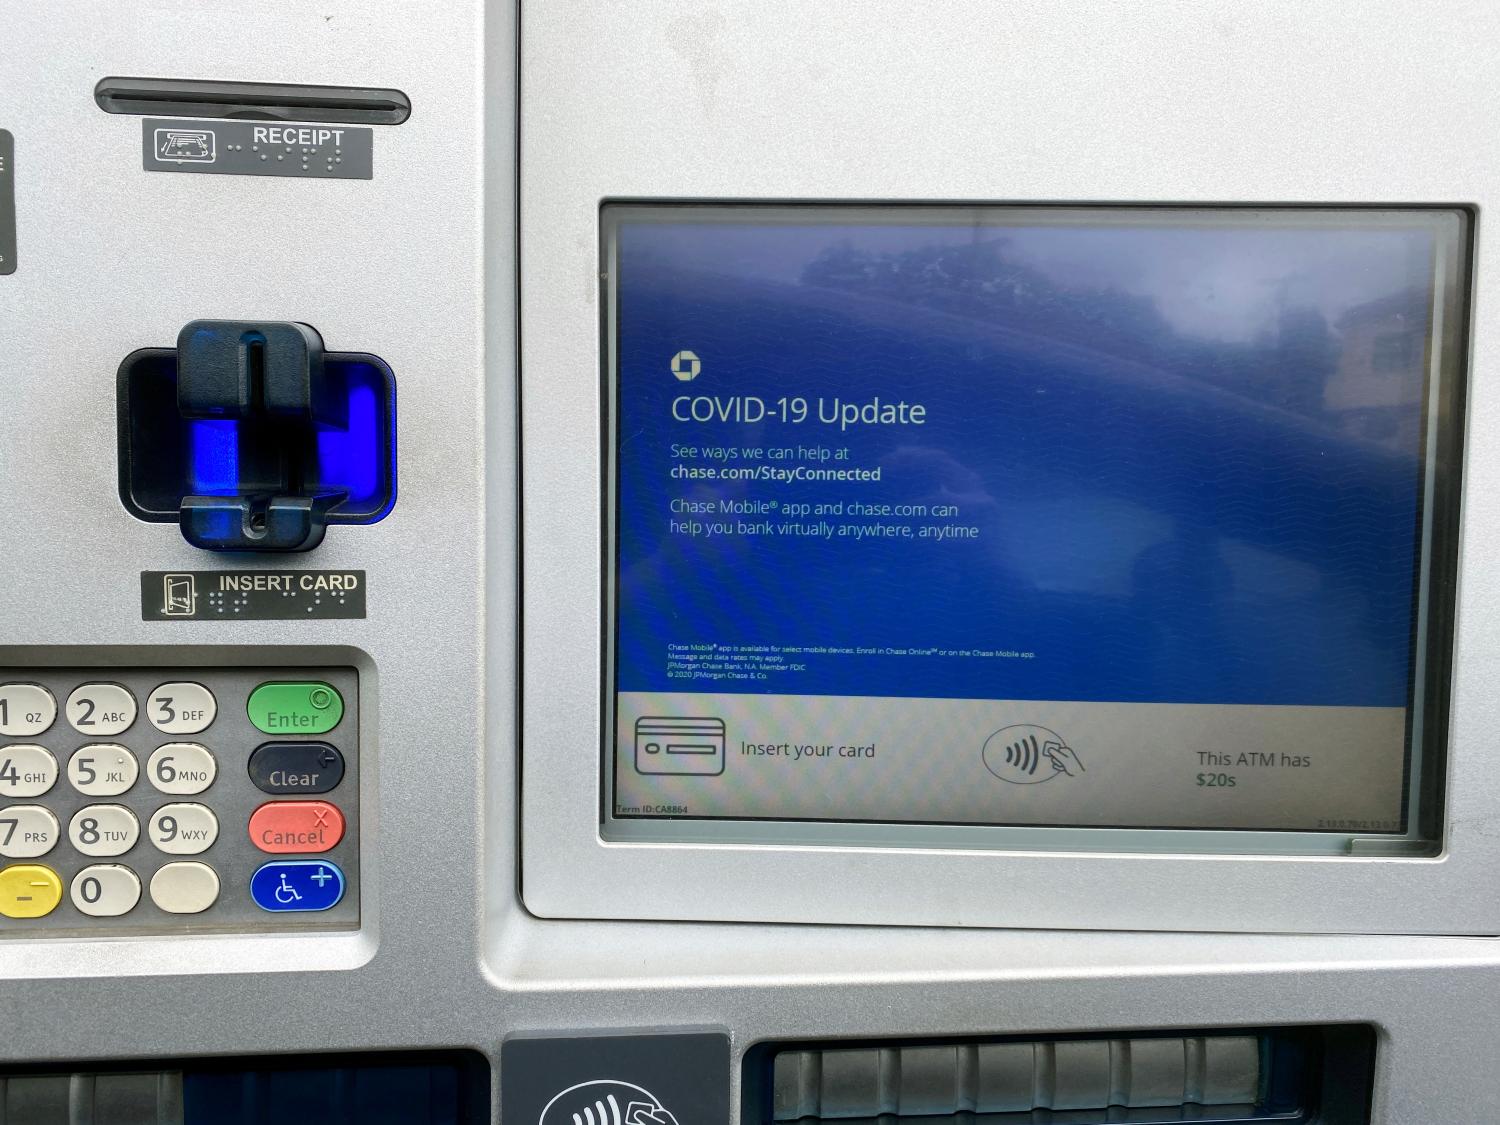 FILE PHOTO: A Chase bank drive-through ATM screen is seen with a COVID-19 message in Santa Monica, California, U.S., amid reports of the coronavirus, March 16, 2020.  REUTERS/Lucy Nicholson/File Photo